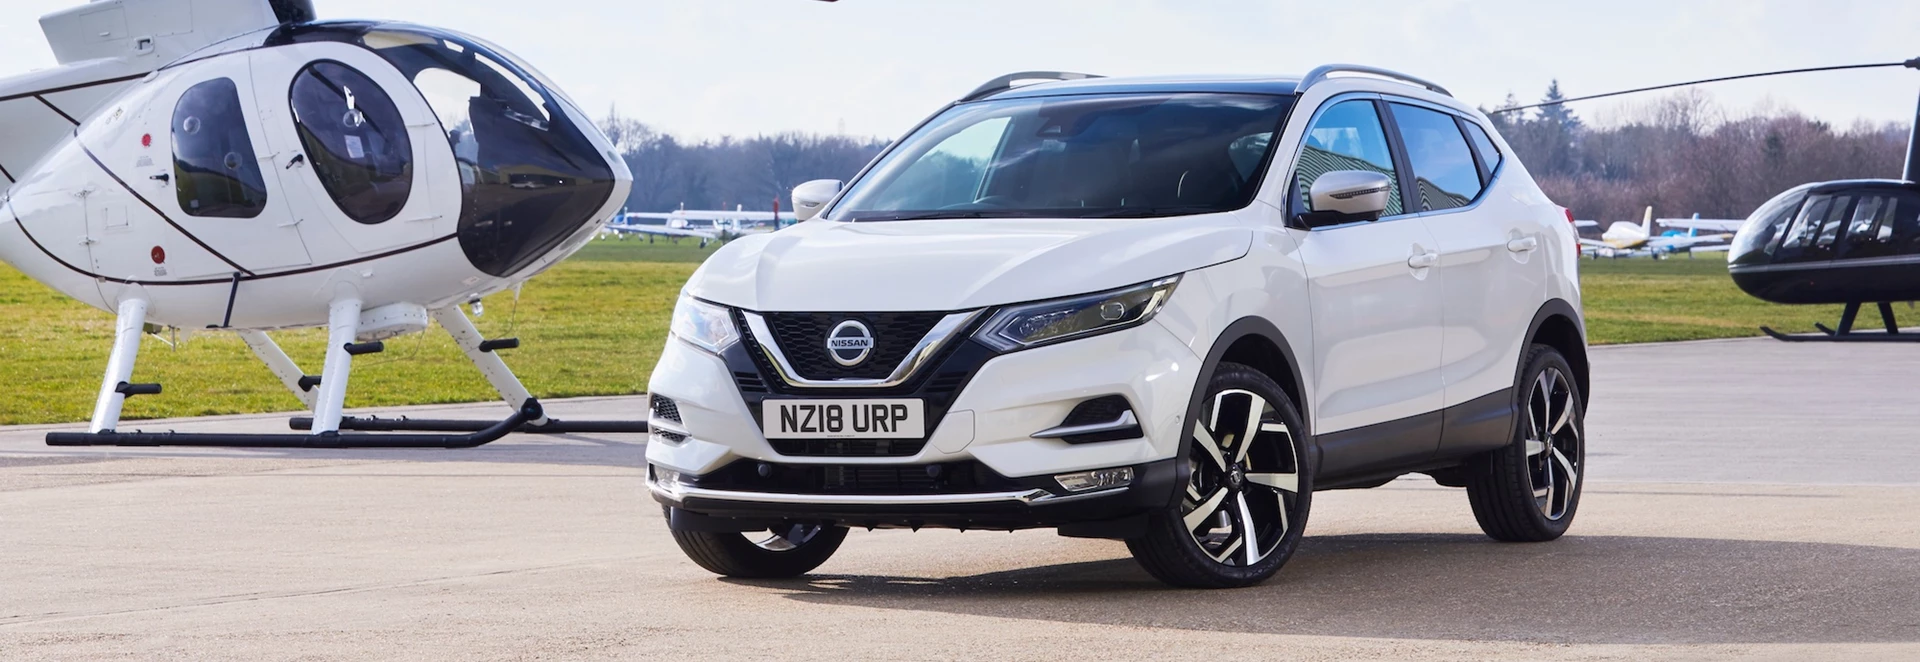 Nissan Qashqai now available with ProPilot driver assistance